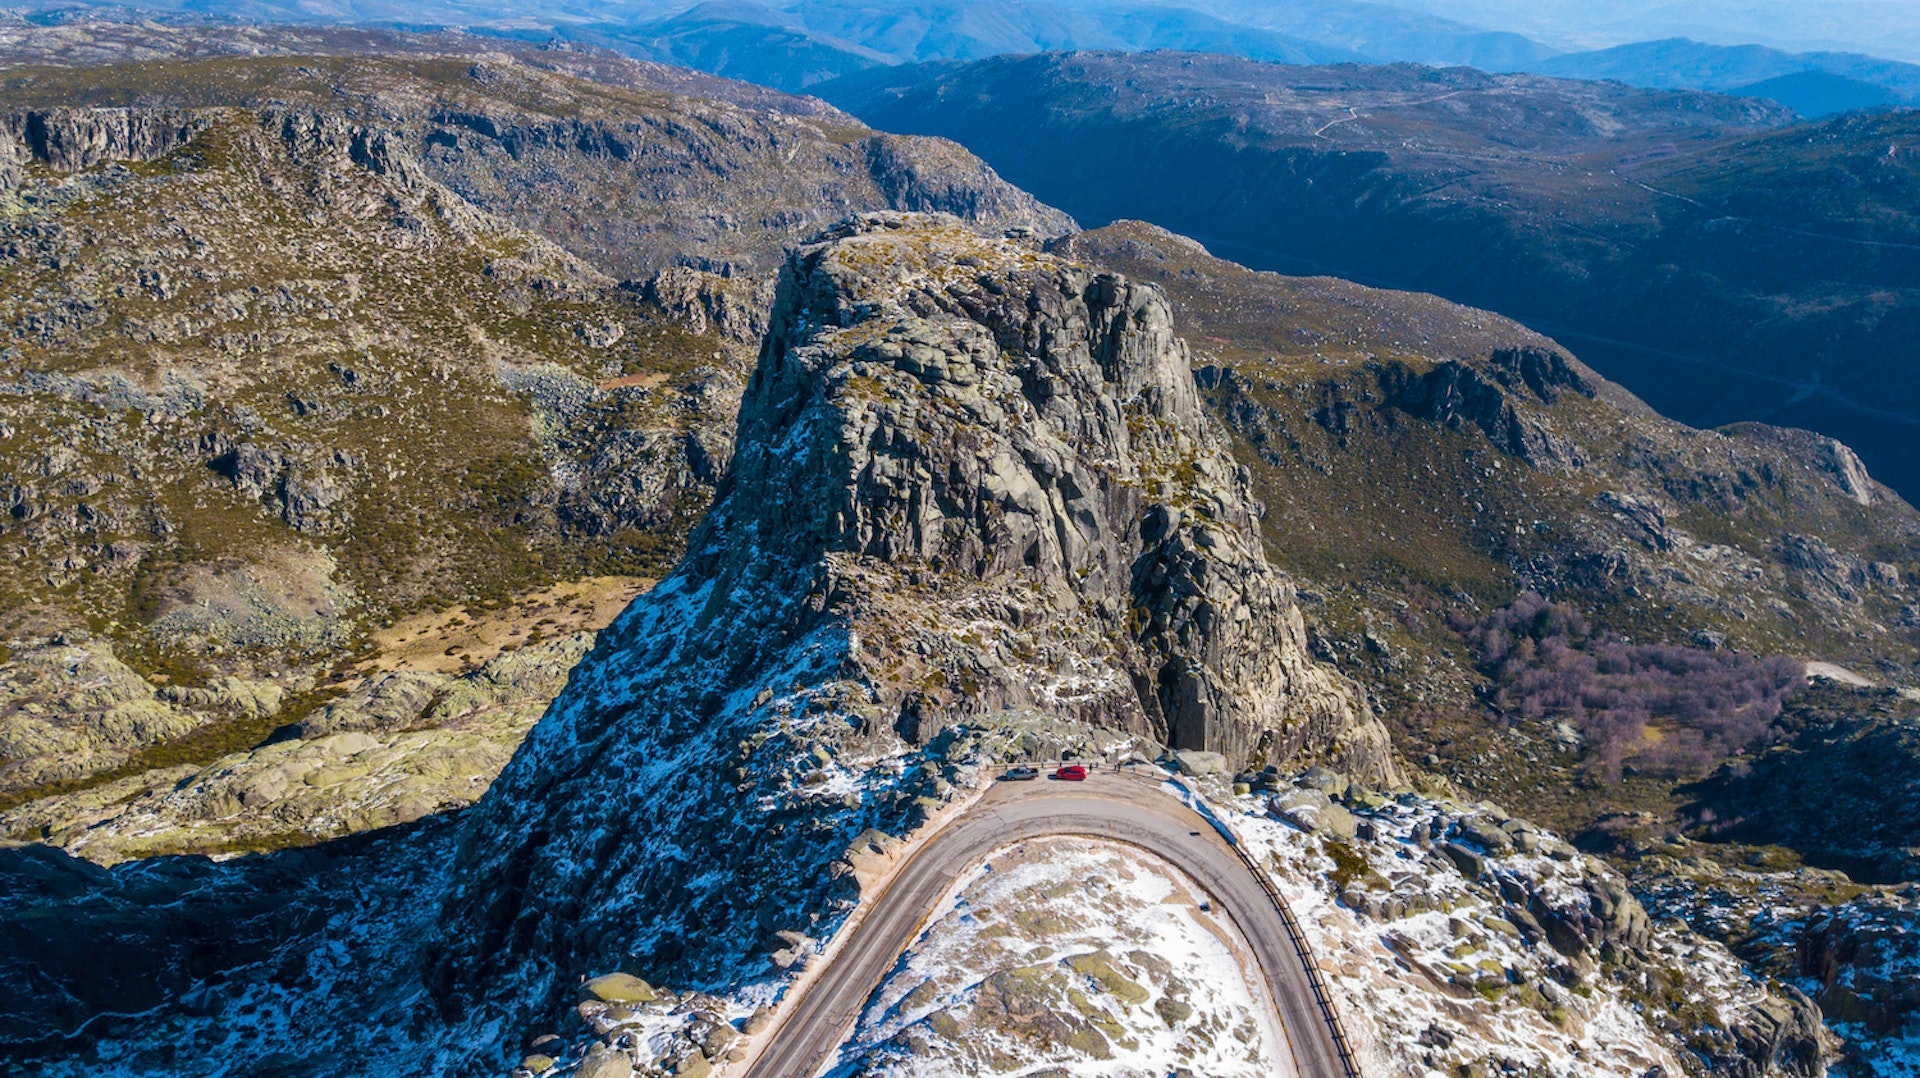 Rocky mountain pass in Serra da Estrela with cars parked on road side